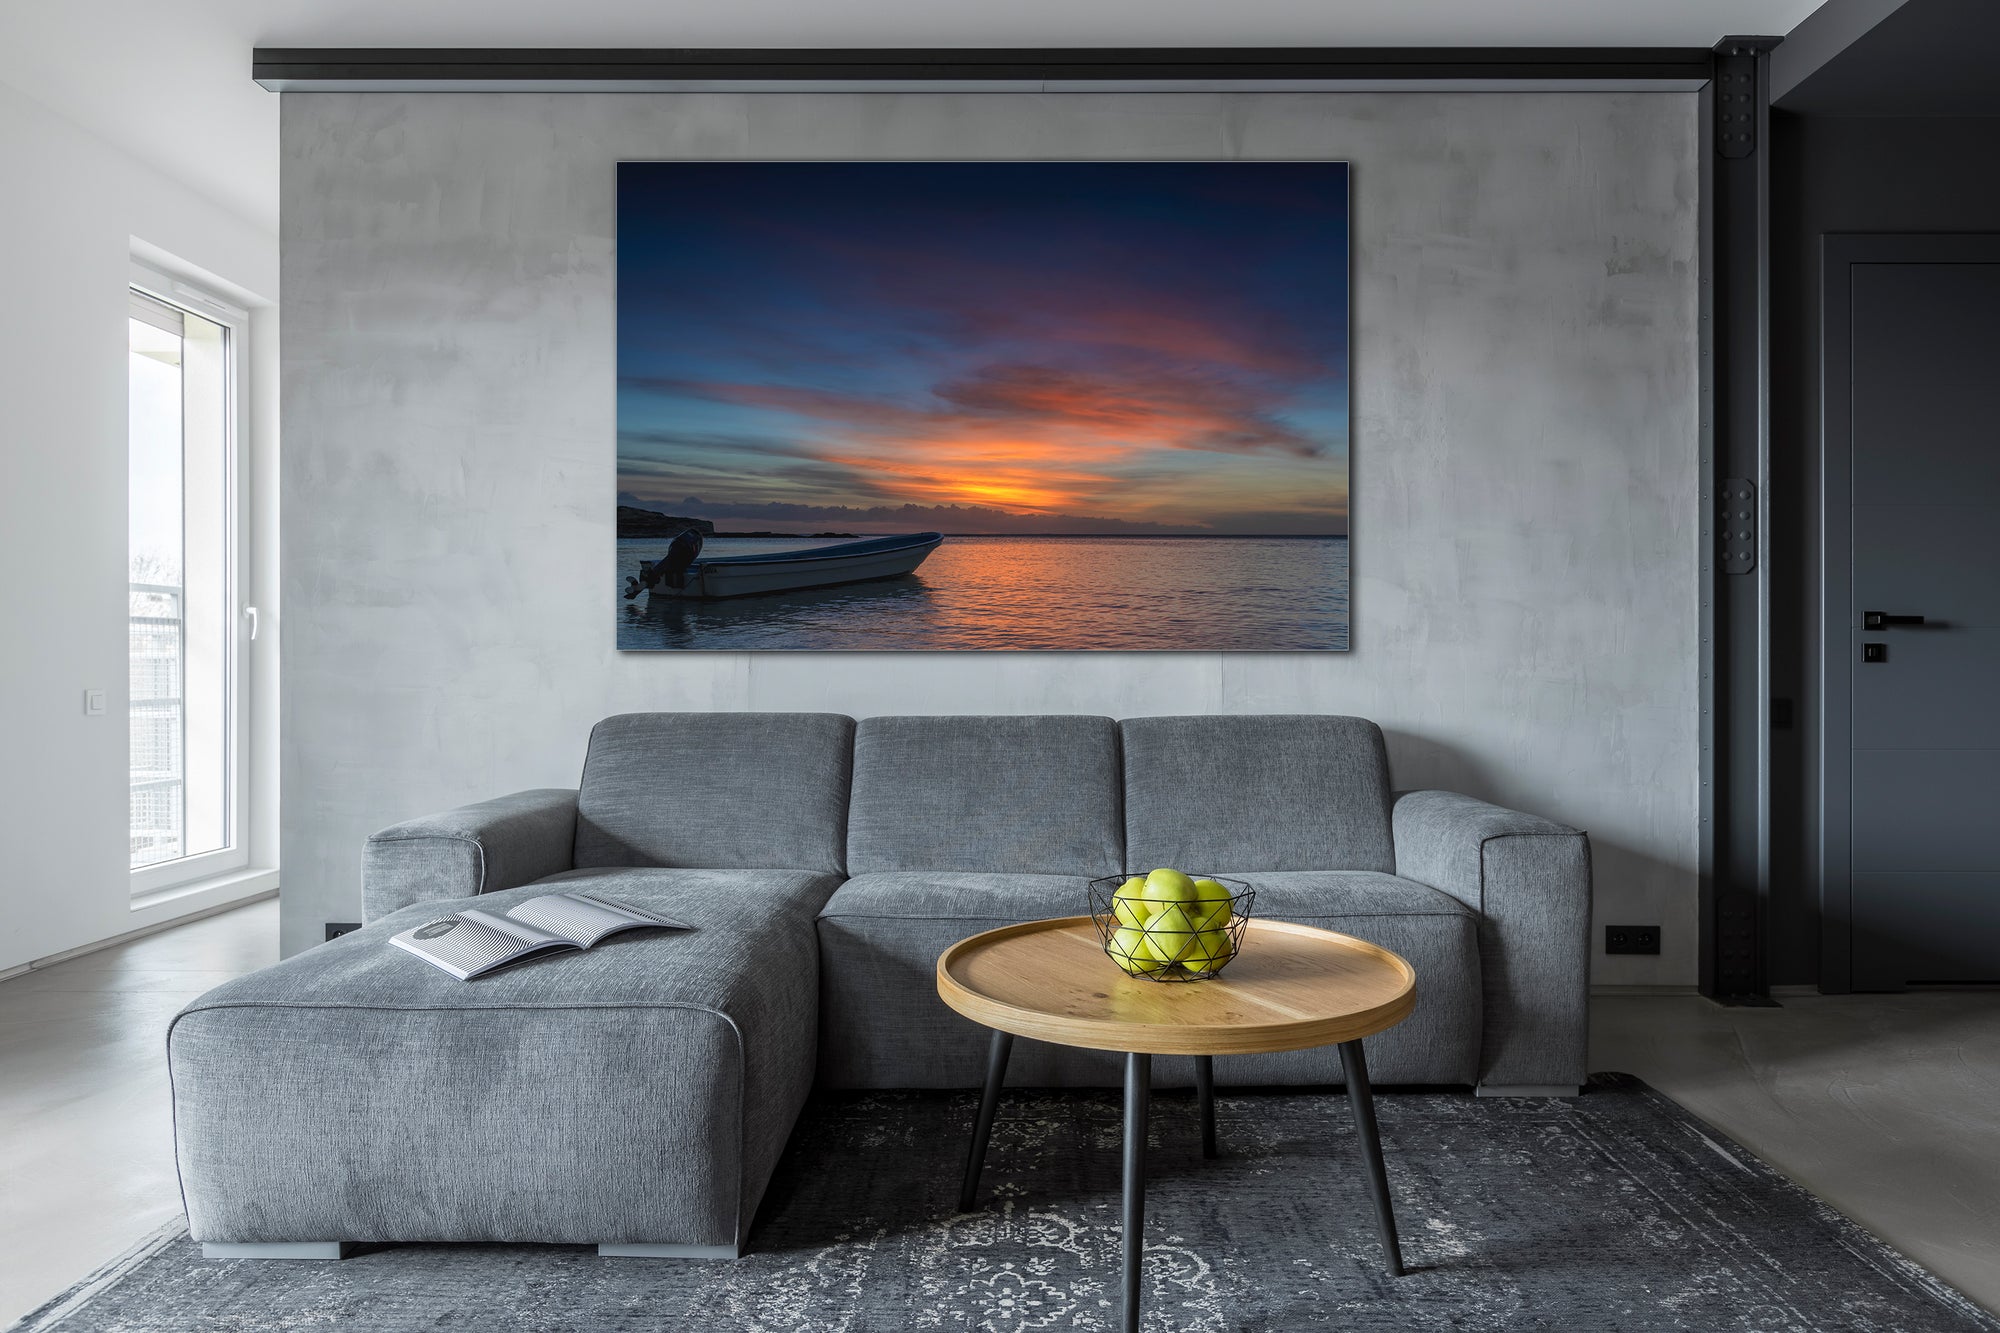 A modern livingroom scene with a large version of "Escape" on the wall above the couch.